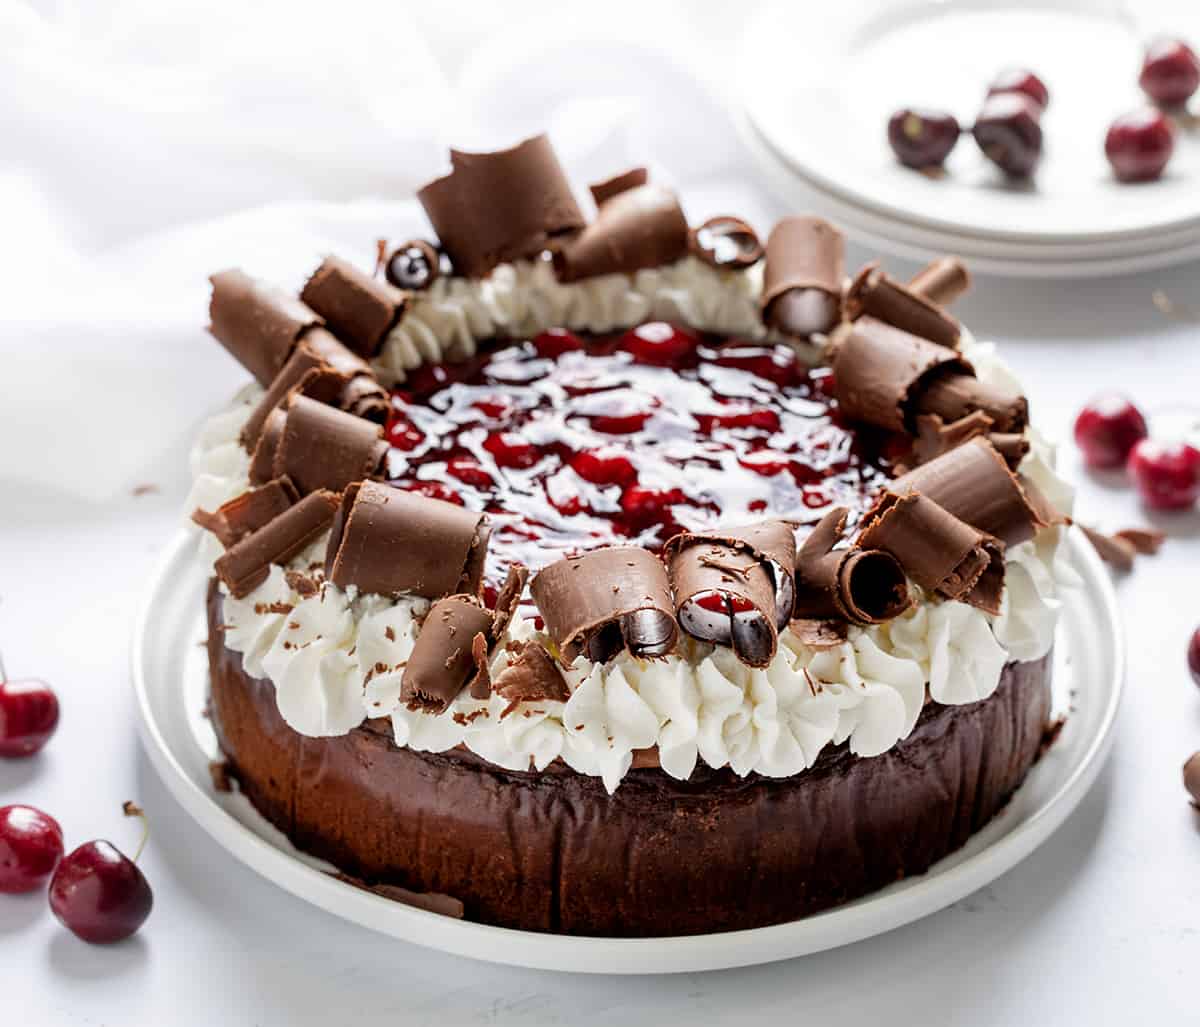 Black Forest Cheesecake on a White Cake Plate on a White Surface and White Plates in the Background.